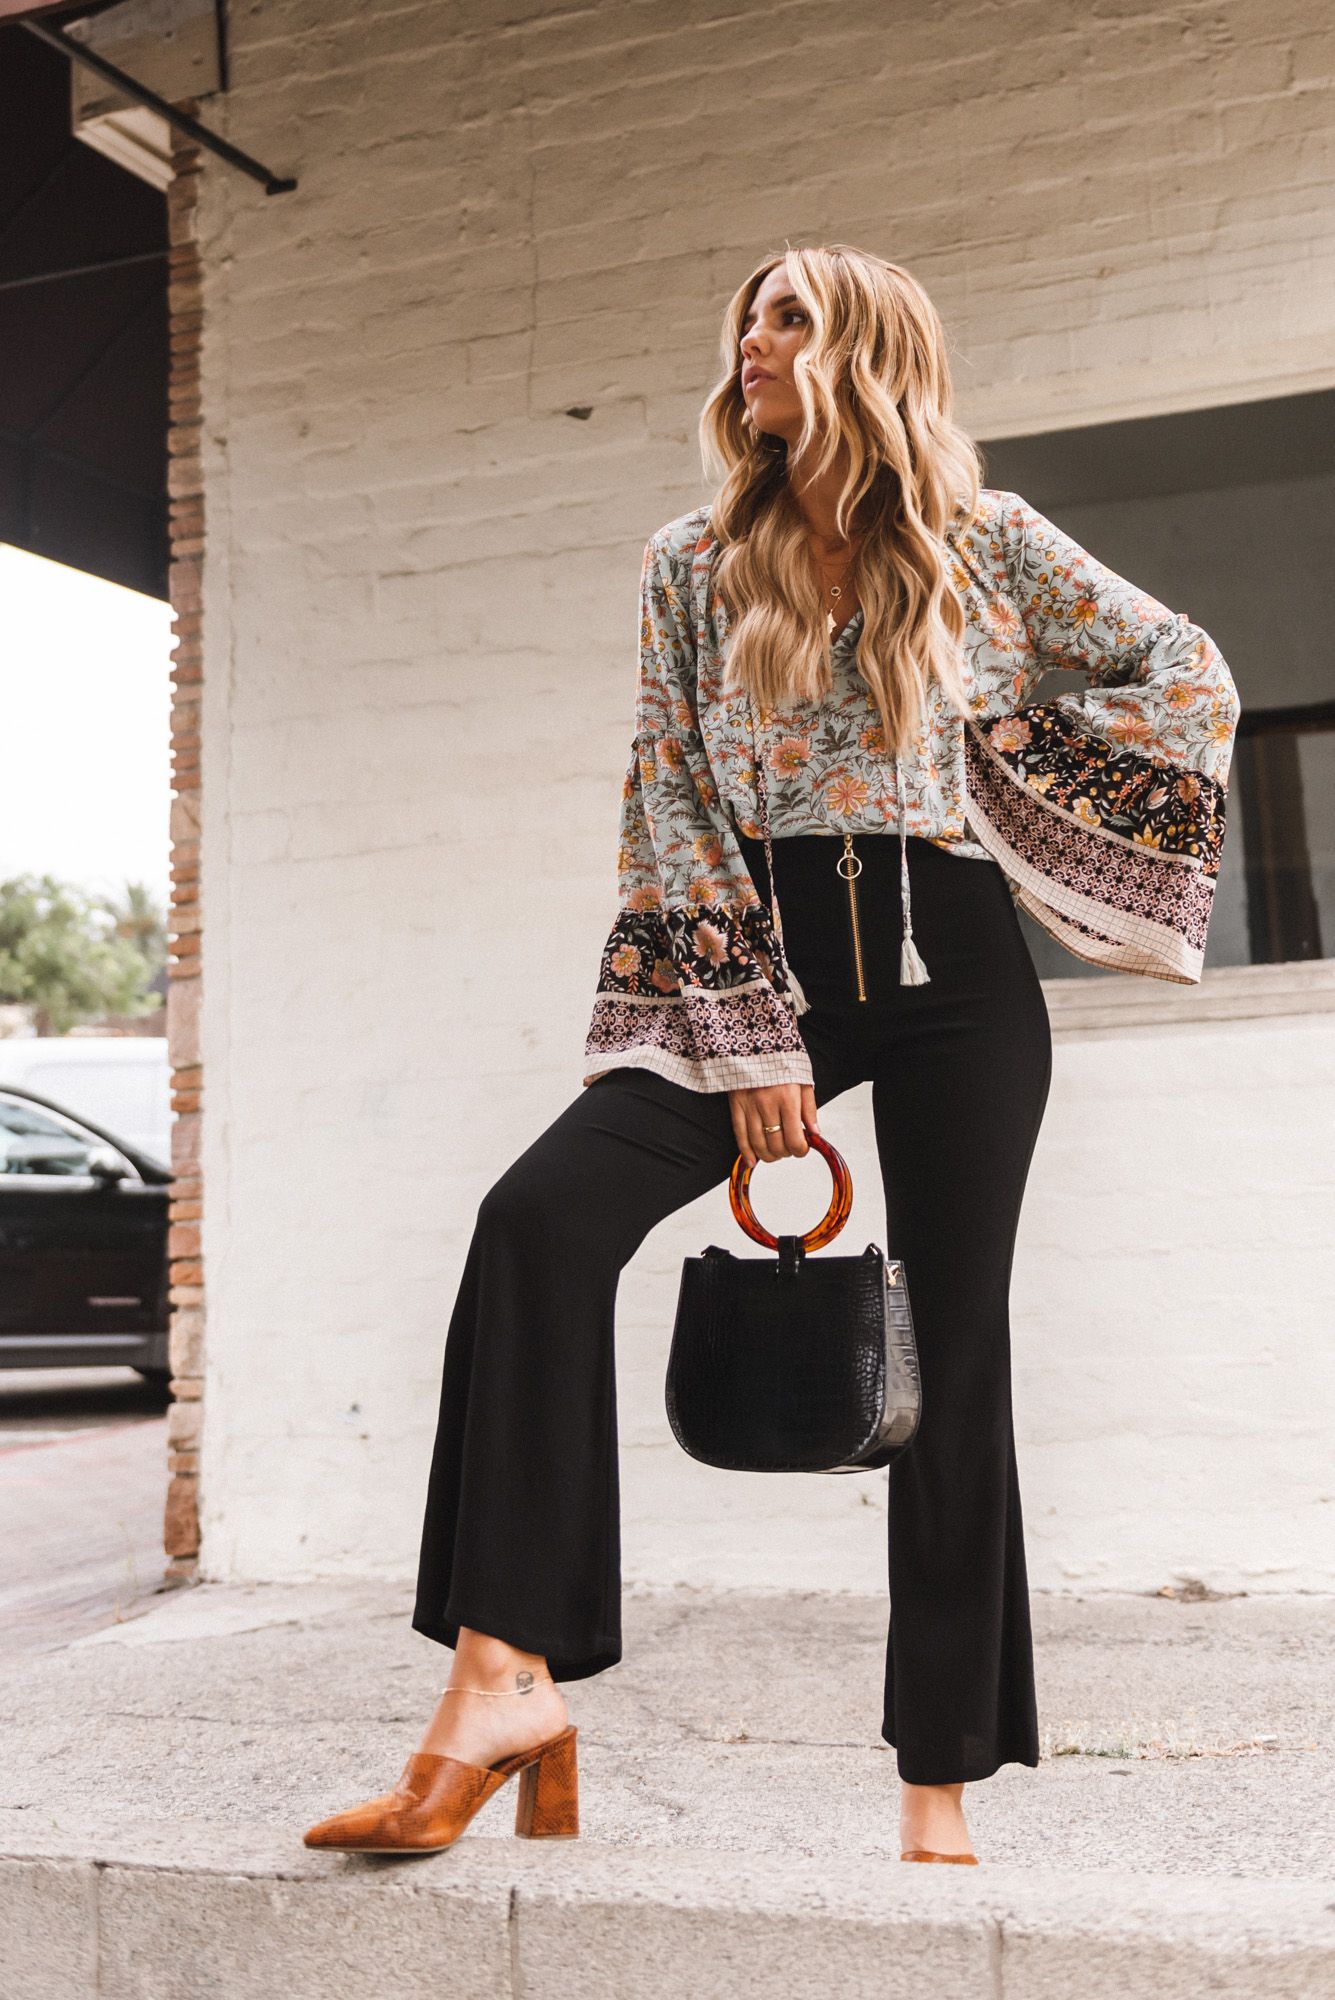 Effortlessly Chic: Bohemian Style Fall Outfits for the Season